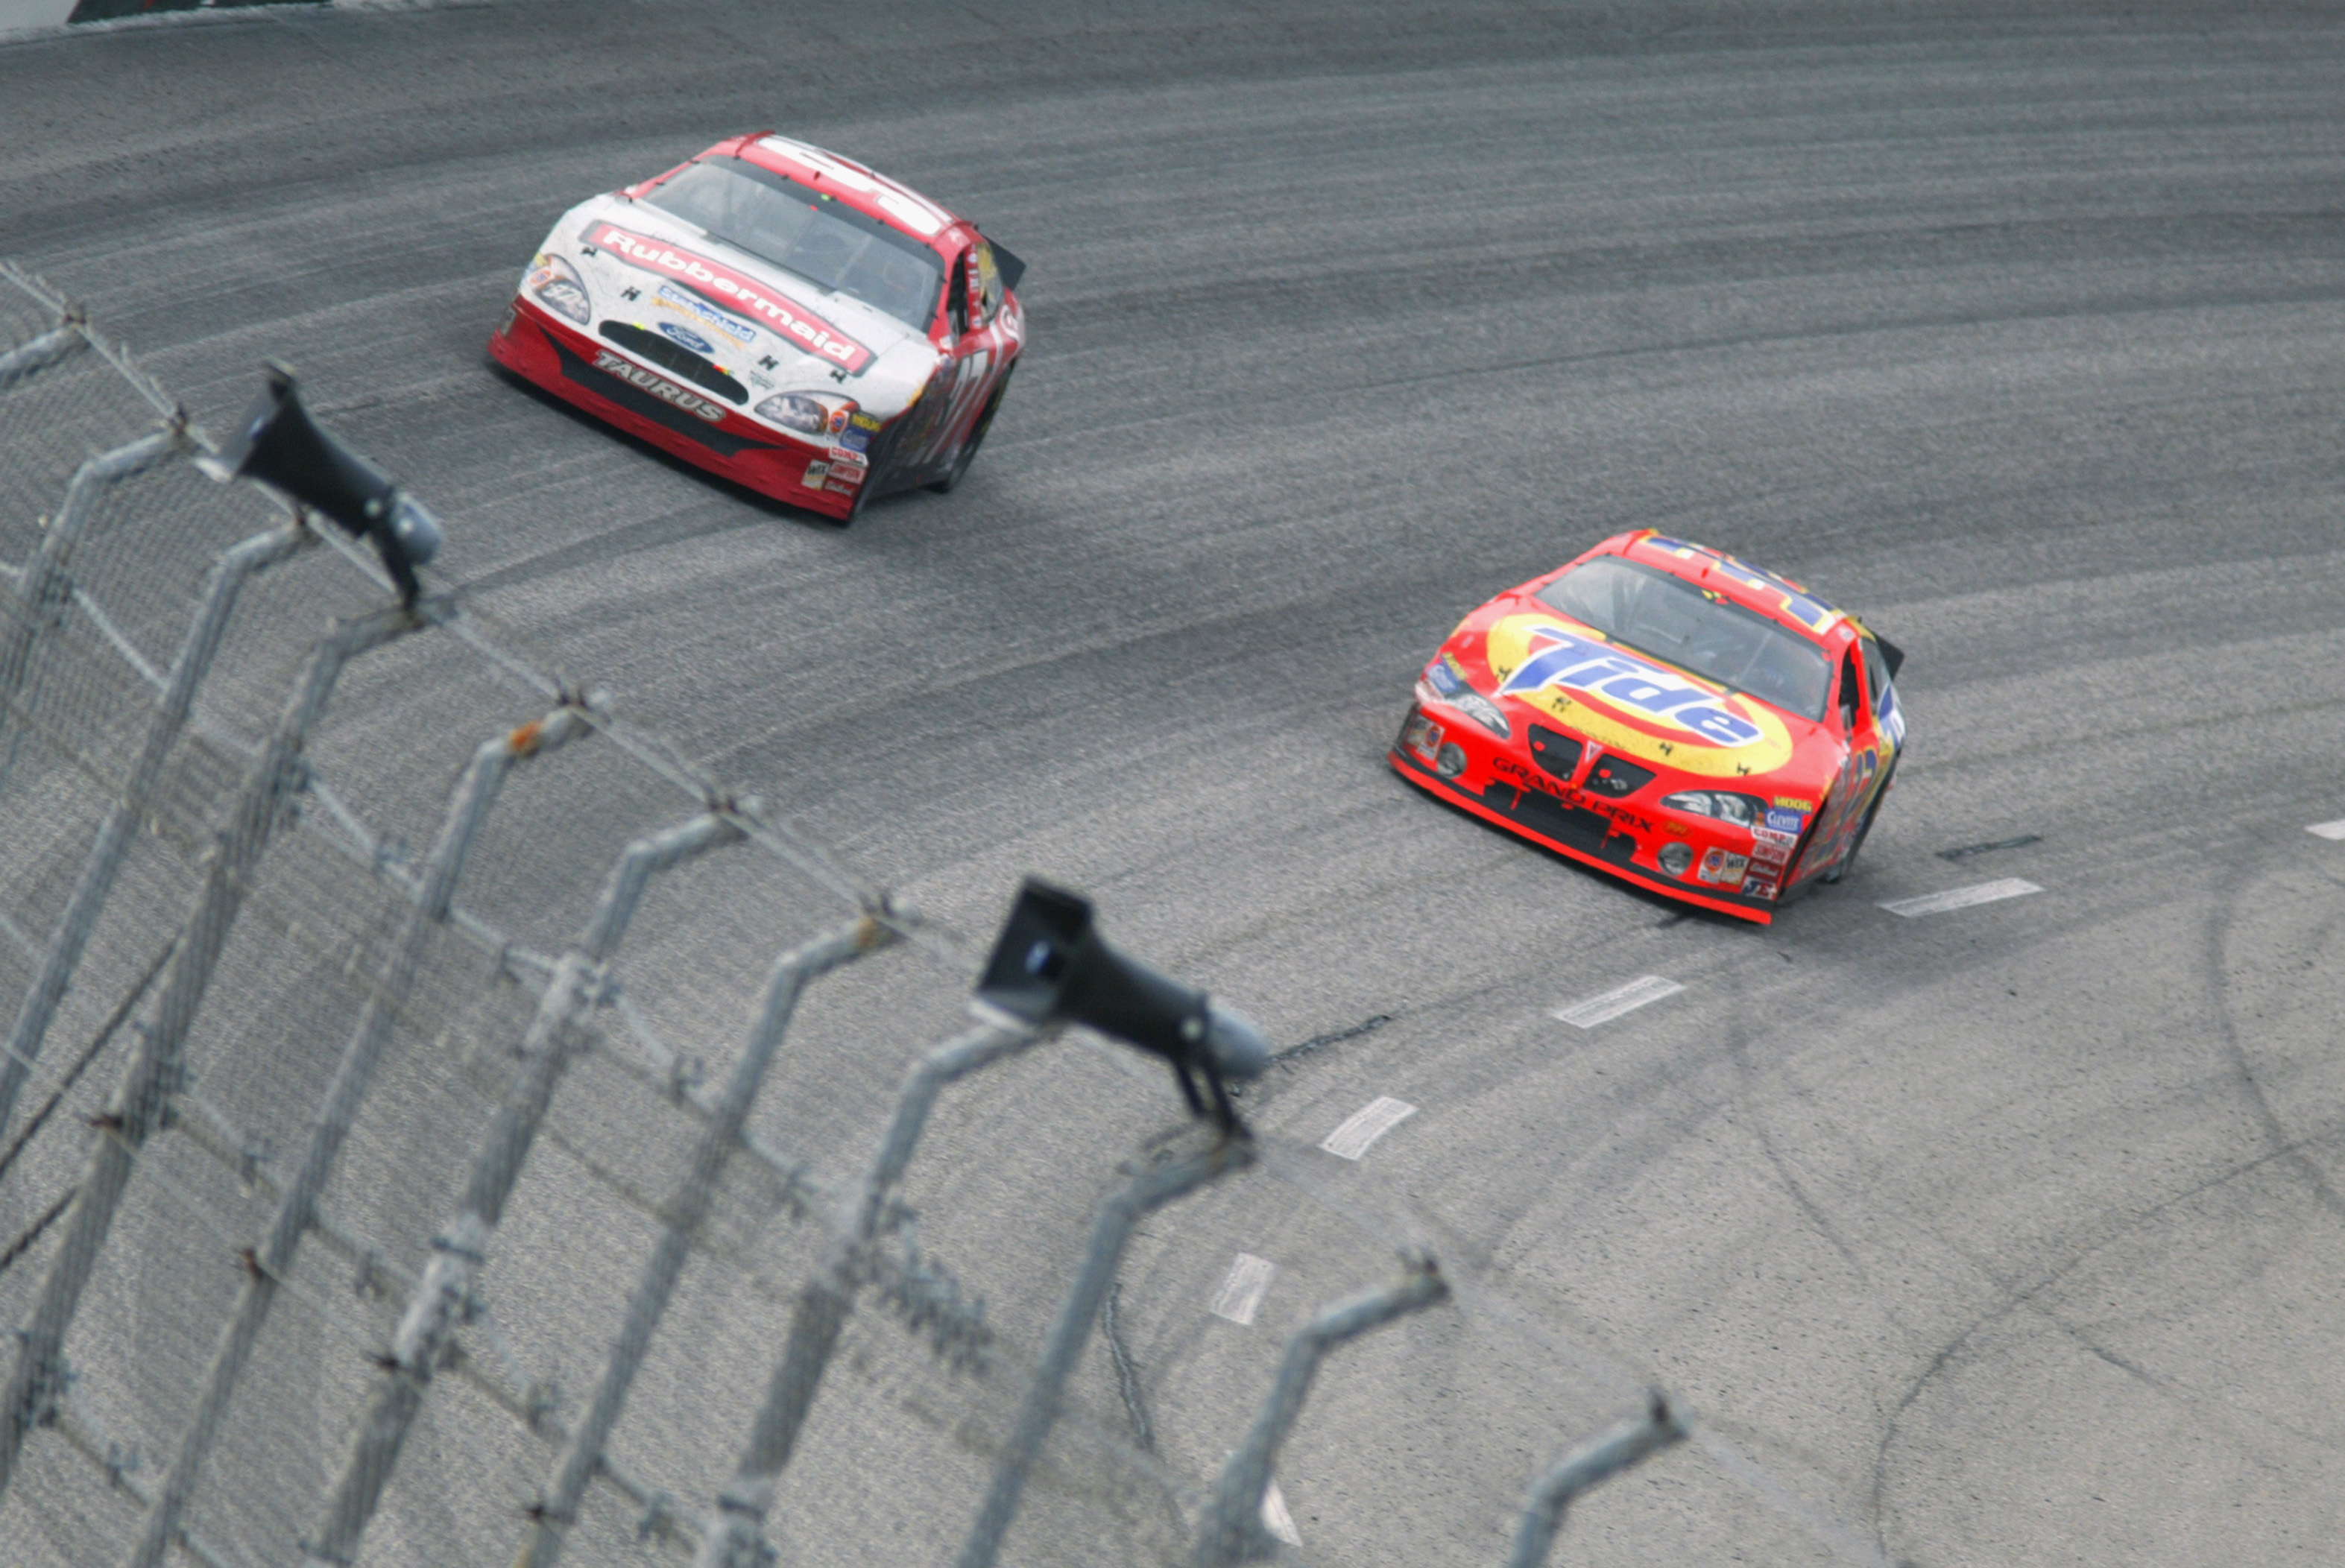 The 2003 Darlington finish was a classic finish at a classic track.